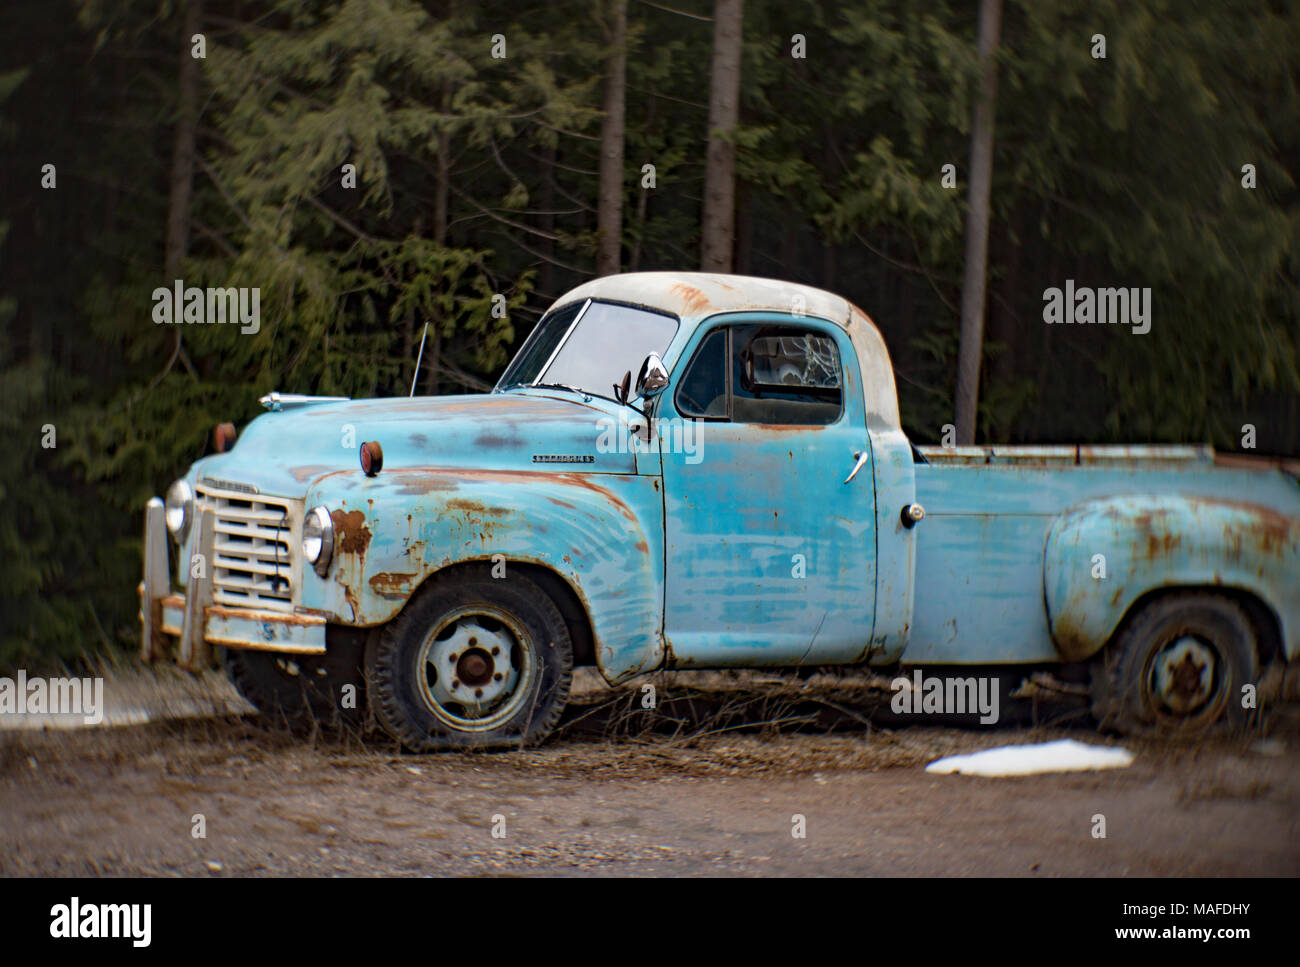 A blue 1949 Studebaker 2R15 pickup truck in an old quarry, east of Clark Fork Idaho. Stock Photo